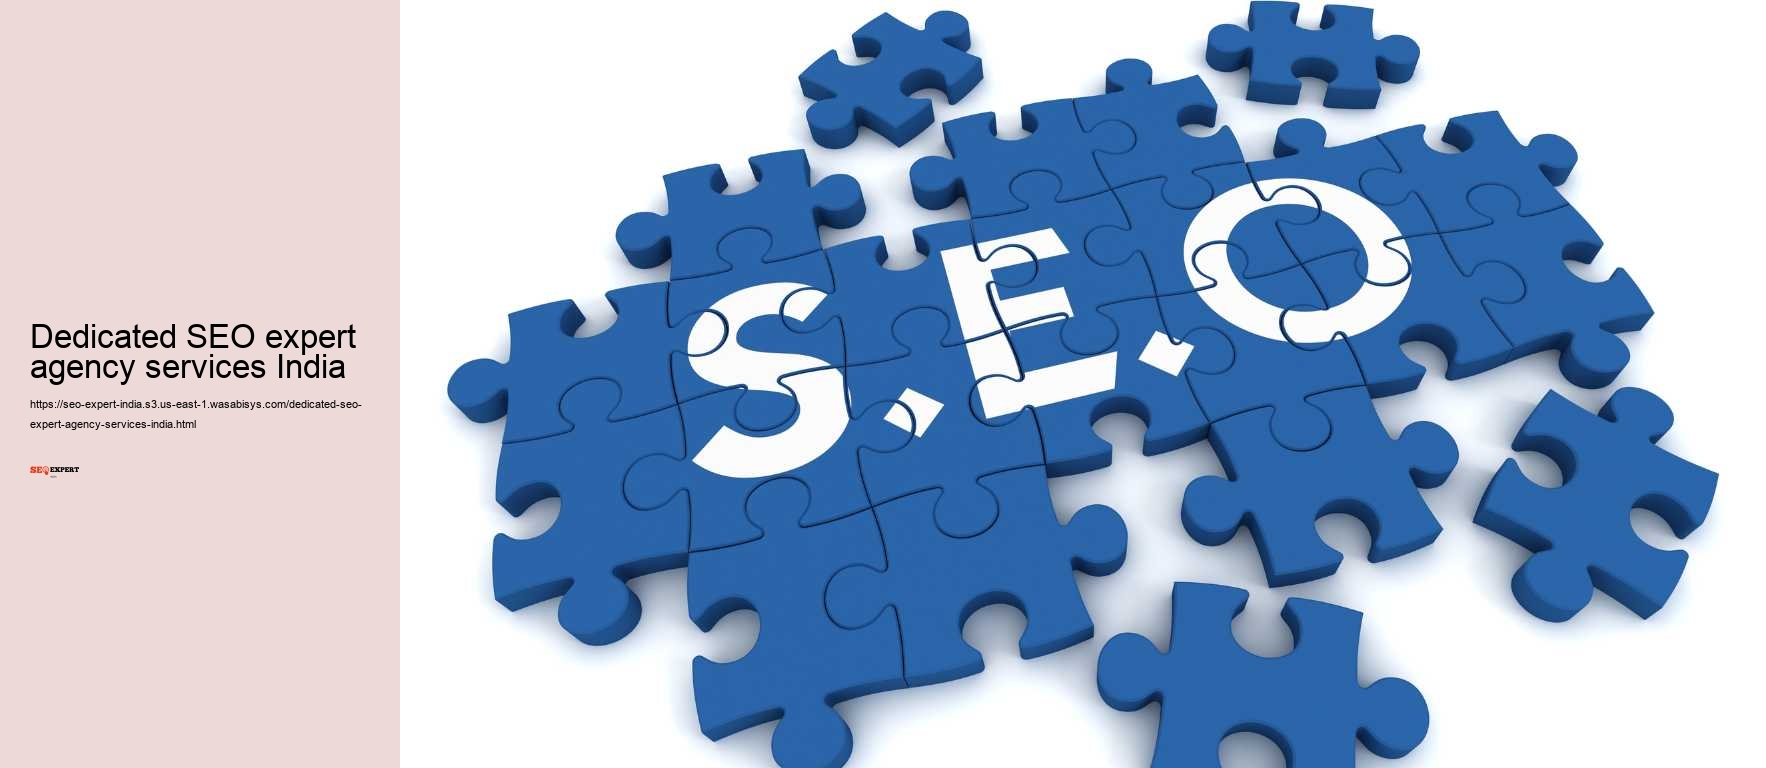 Dedicated SEO expert agency services India